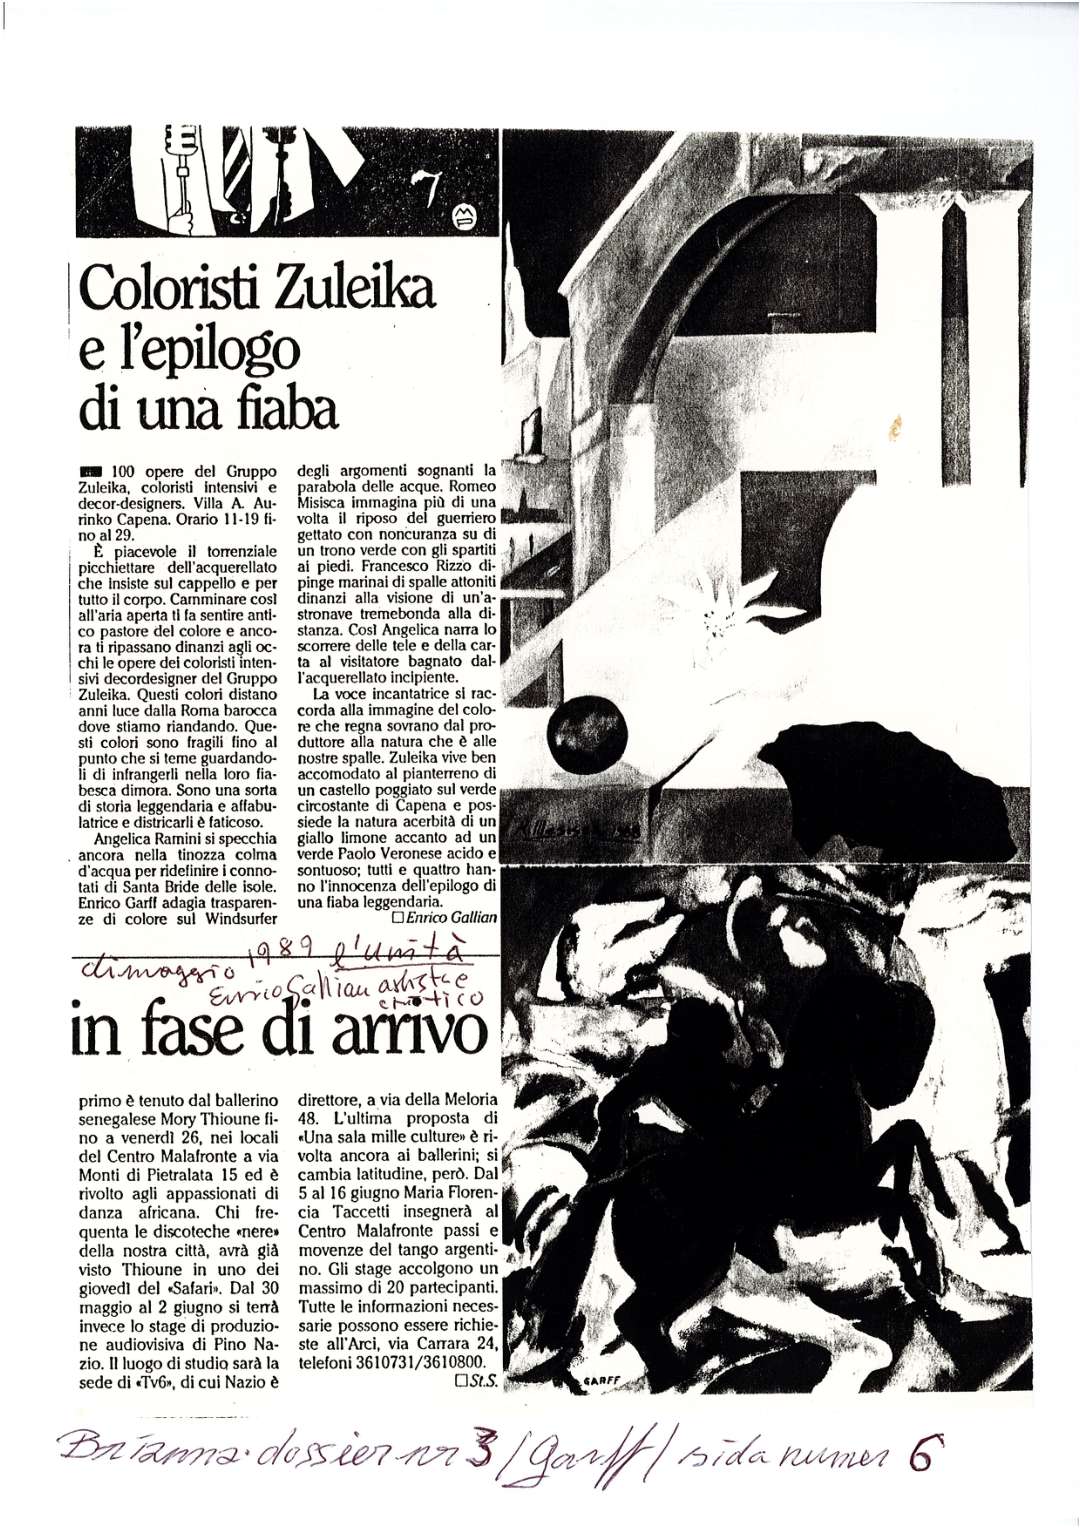 An newspaper clip of an article regarding Enrico Garff's art exhibited in Capena a small town  next to Rome in Italy.